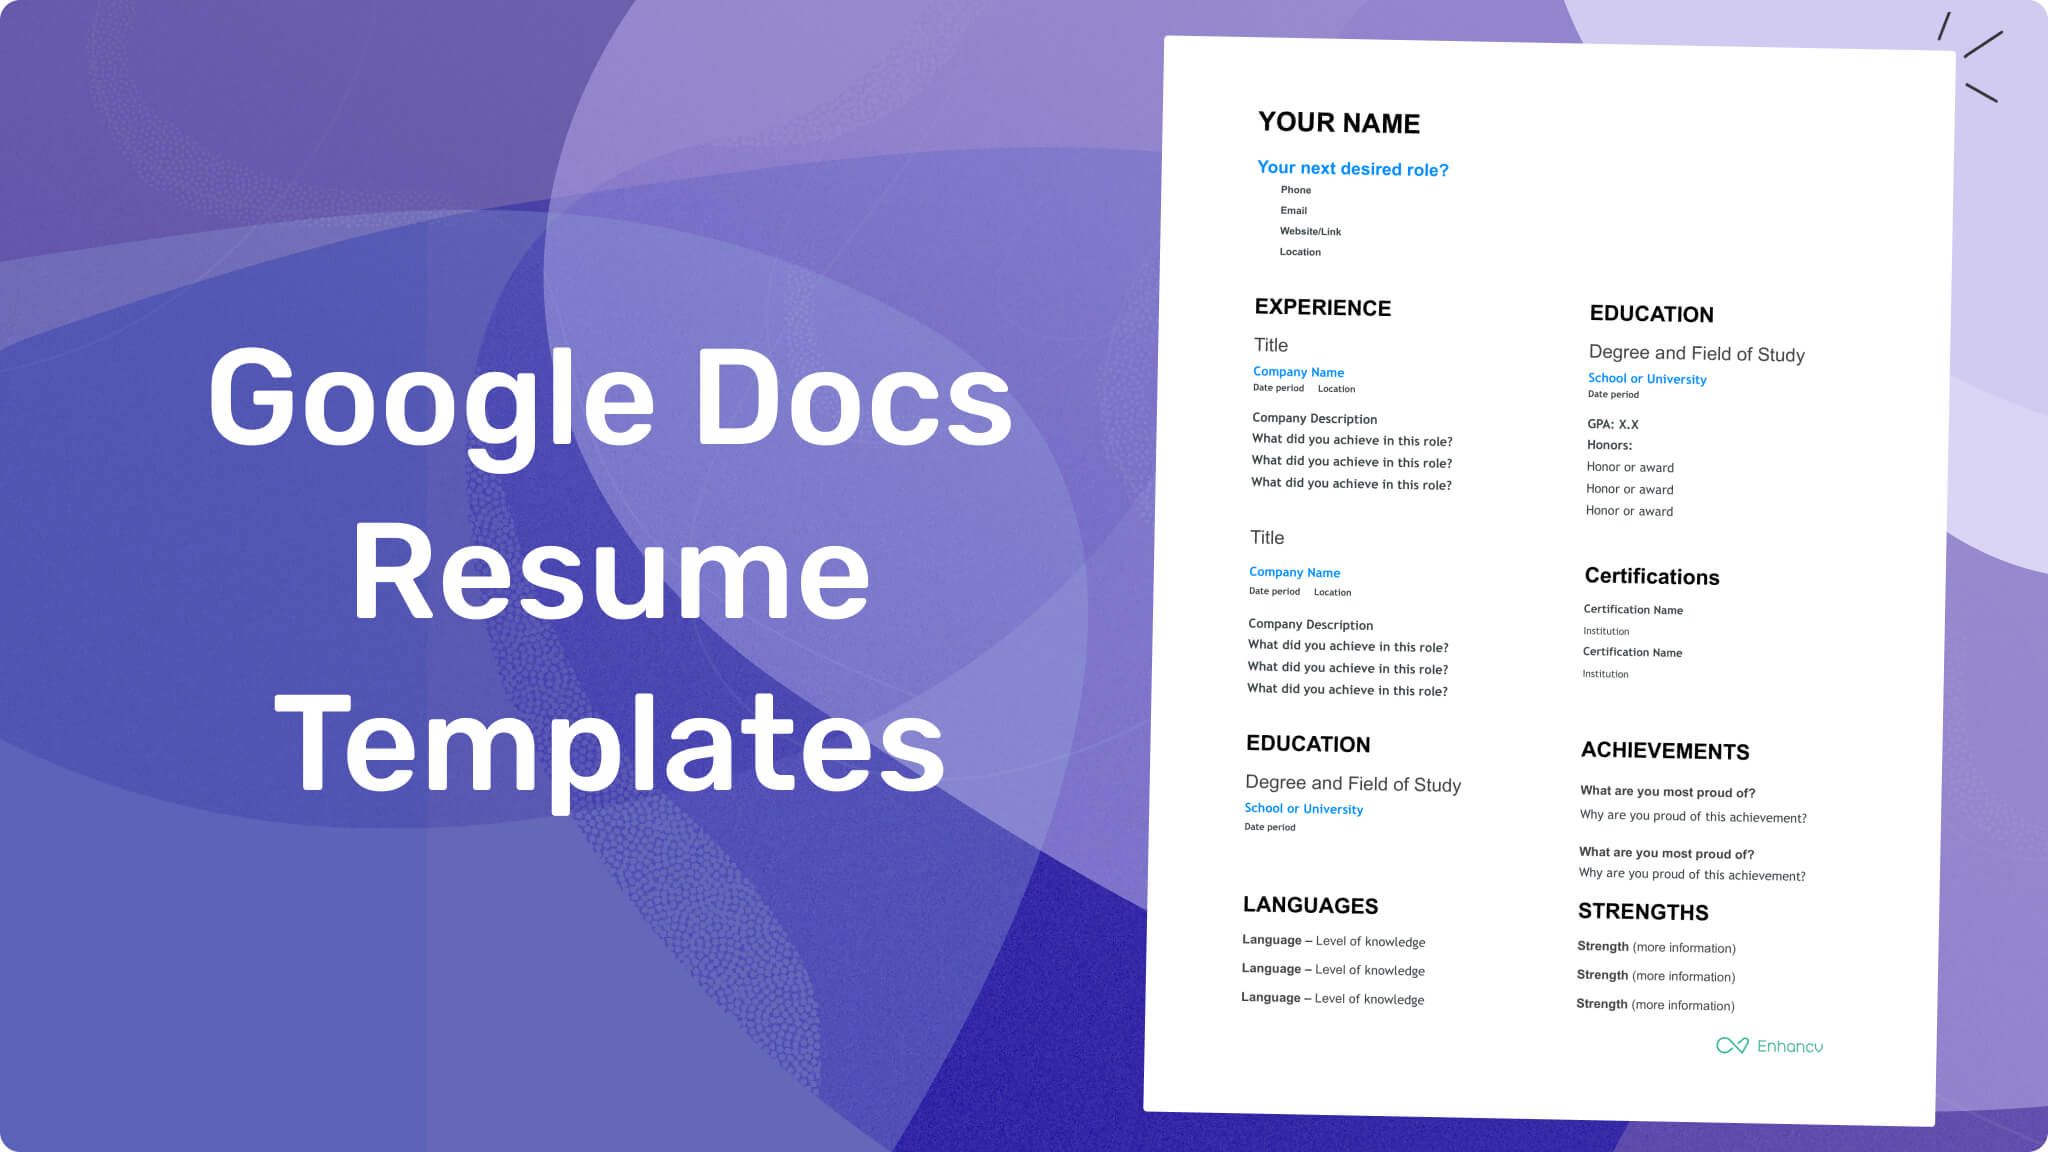 where to find resume templates in google docs